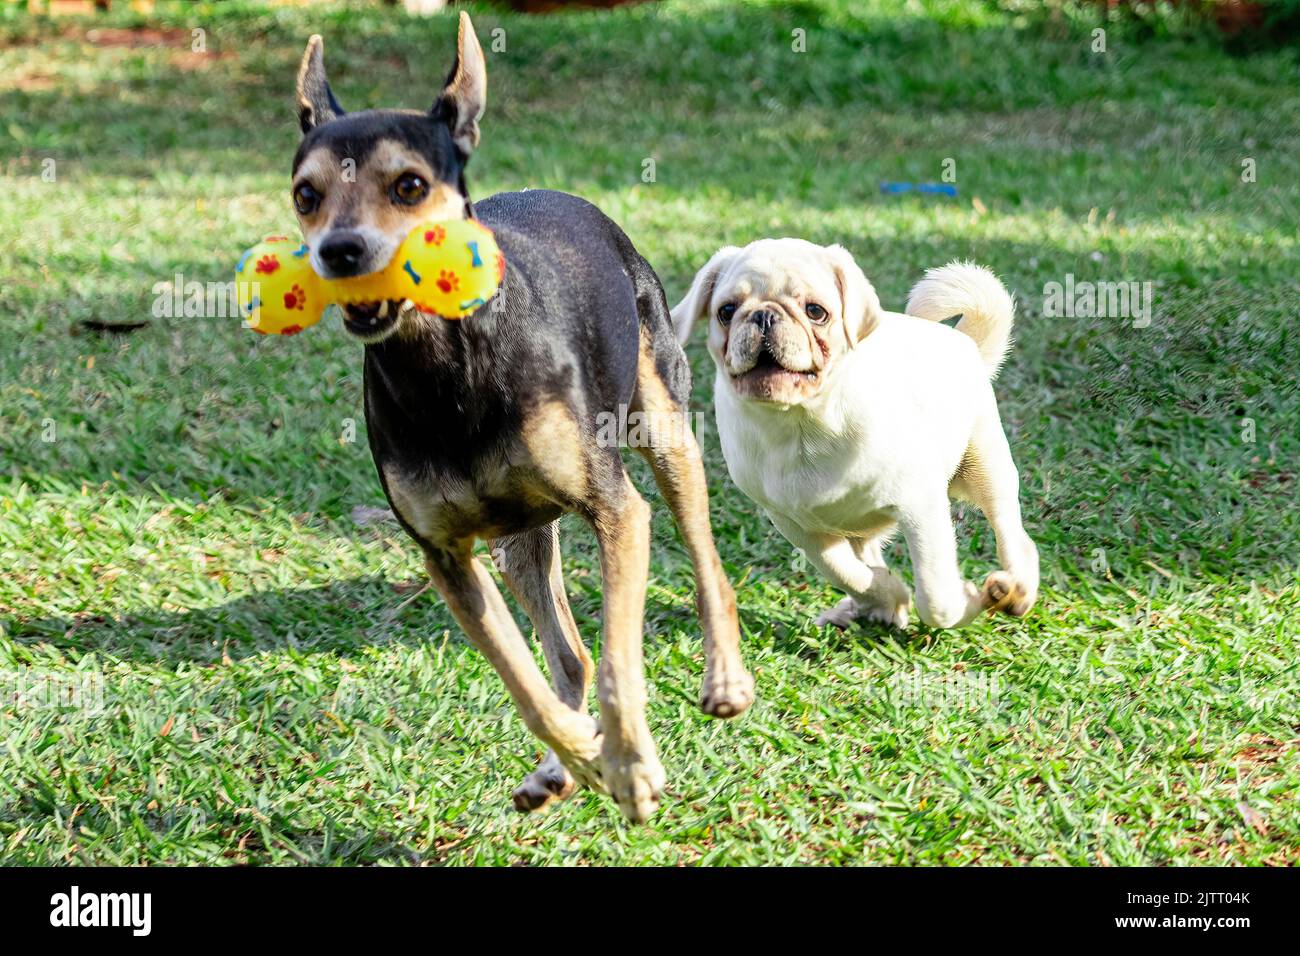 Pinscher and pug dog chasing each other on the grass, playing. Stock Photo